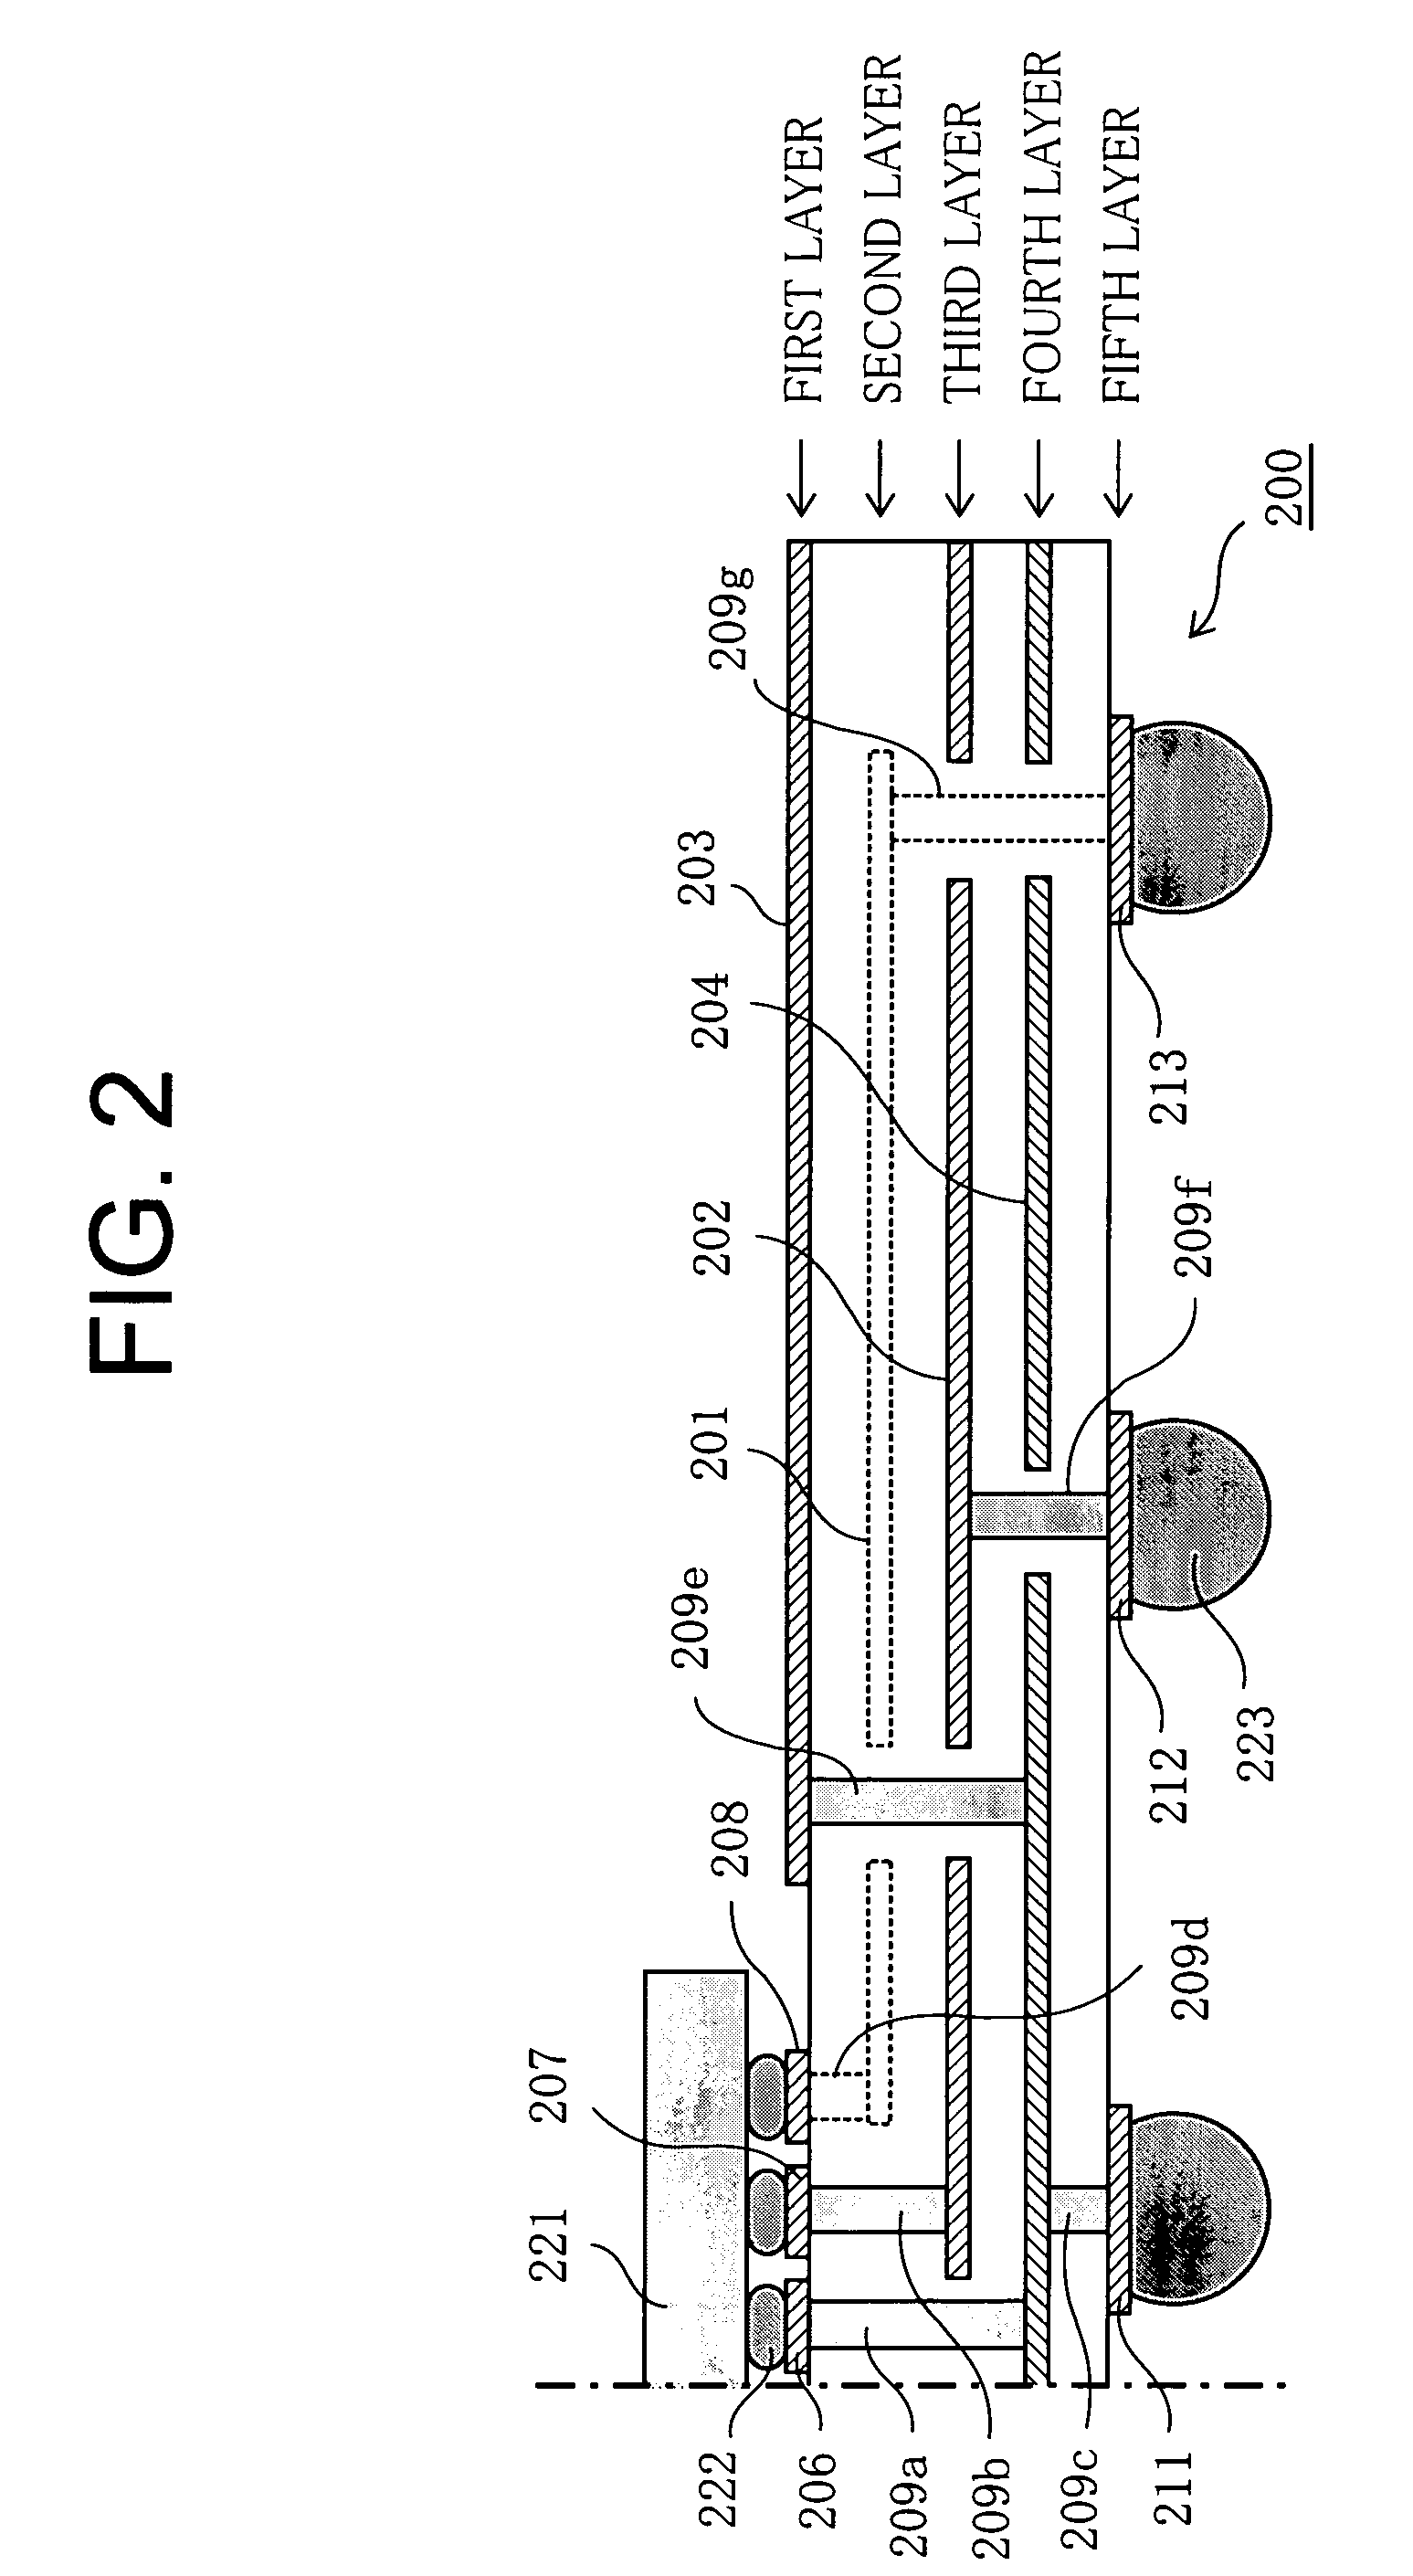 Wiring board having connecting wiring between electrode plane and connecting pad